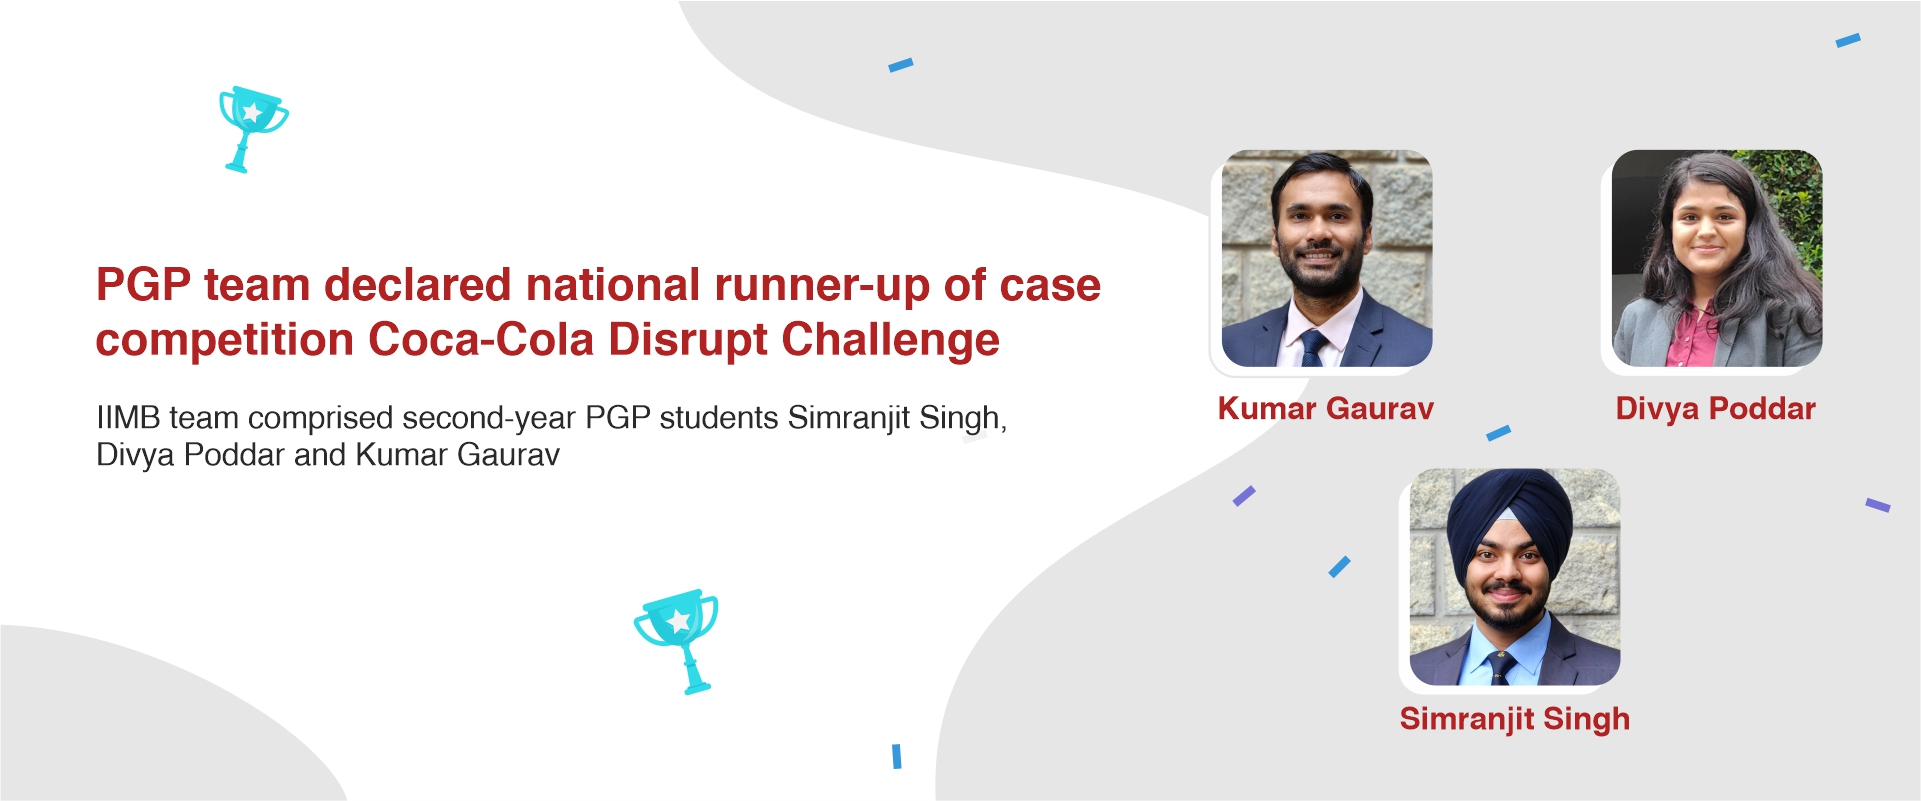 PGP team declared national runner-up of case competition Coca-Cola Disrupt Challenge